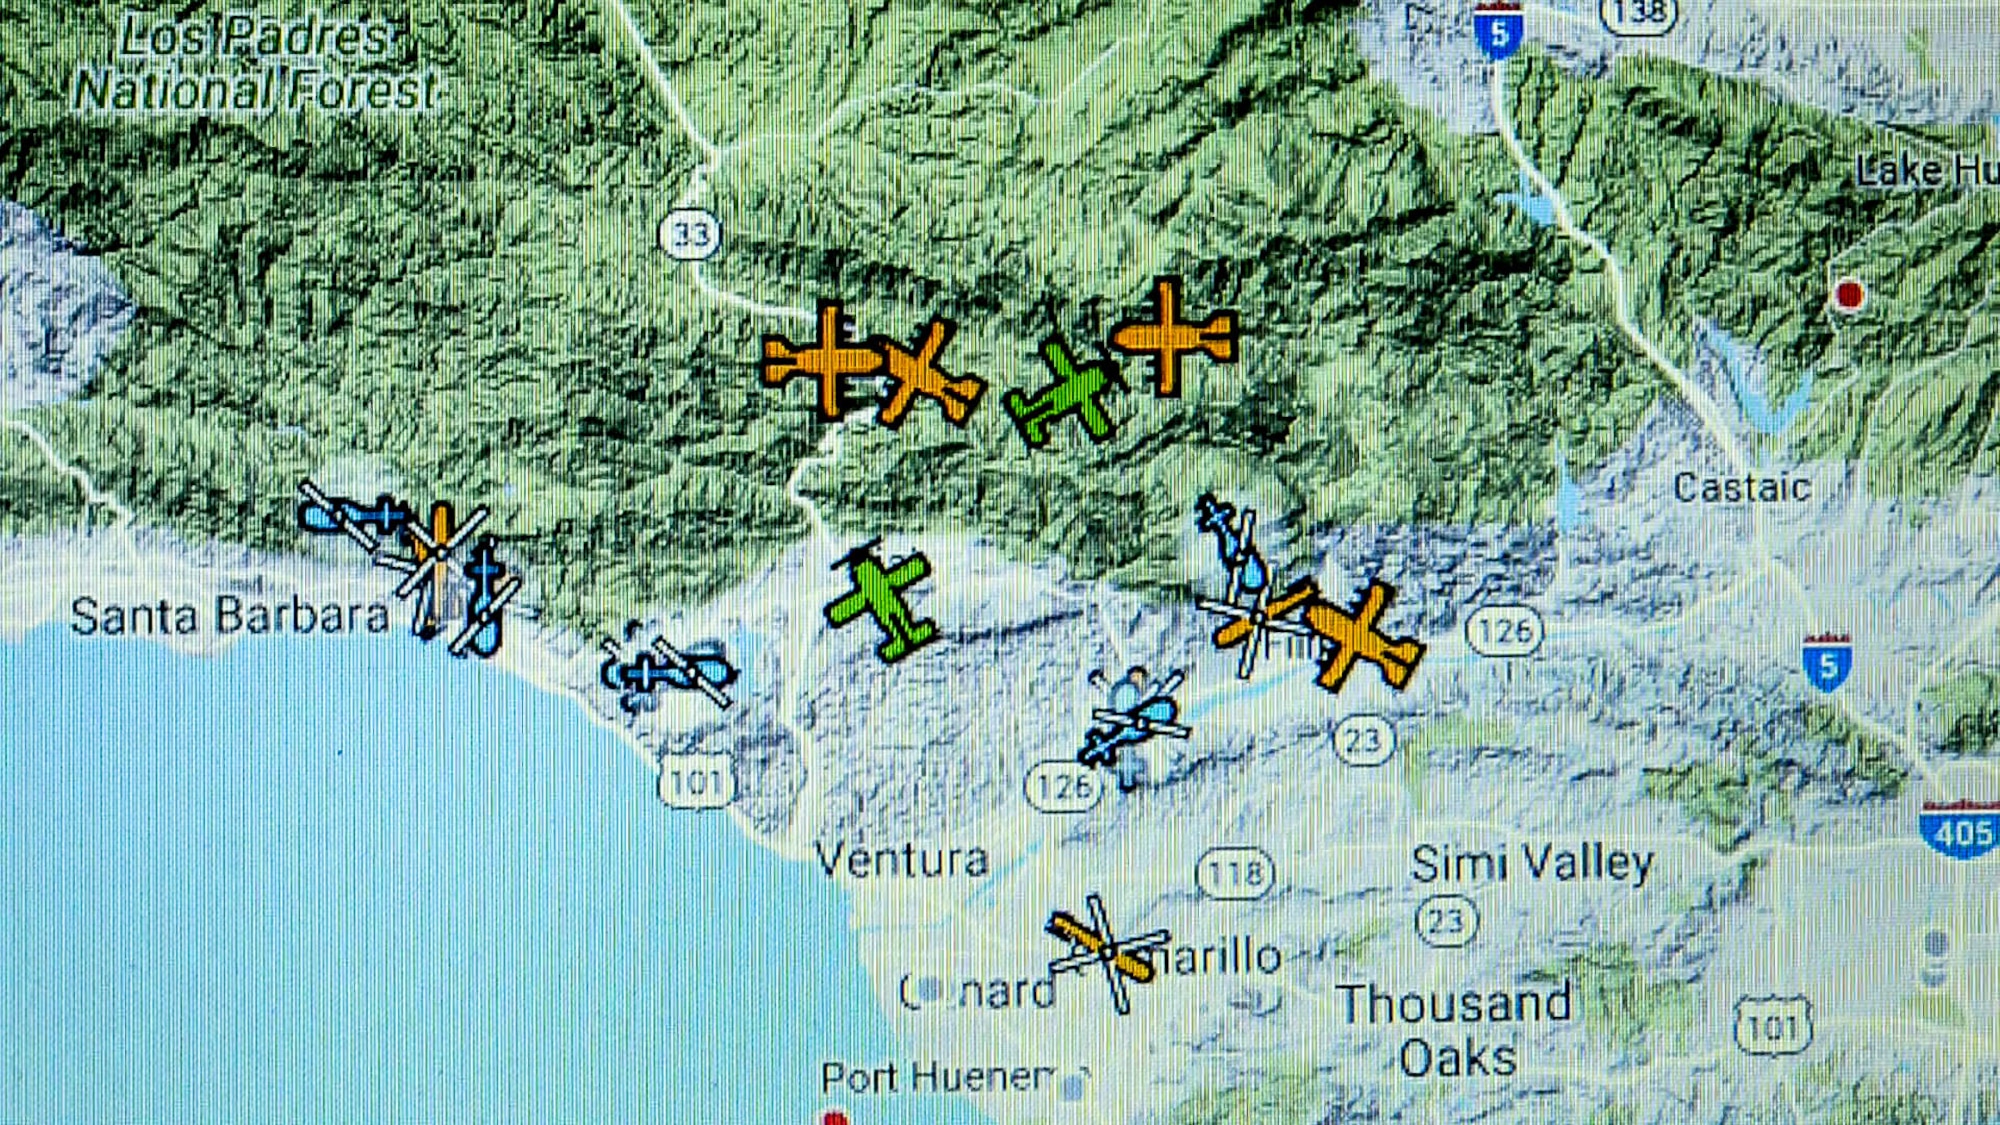 A computer display at the 146th Airlift Wing at Channel Islands Air National Guard Base in Port Hueneme, California, shows the position of aircraft performing aerial firefighting operations to combat the Thomas Fire in Ventura and Santa Barbara Counties, Dec. 10, 2017. (U.S. Air Force photo by J.M. Eddins Jr.)